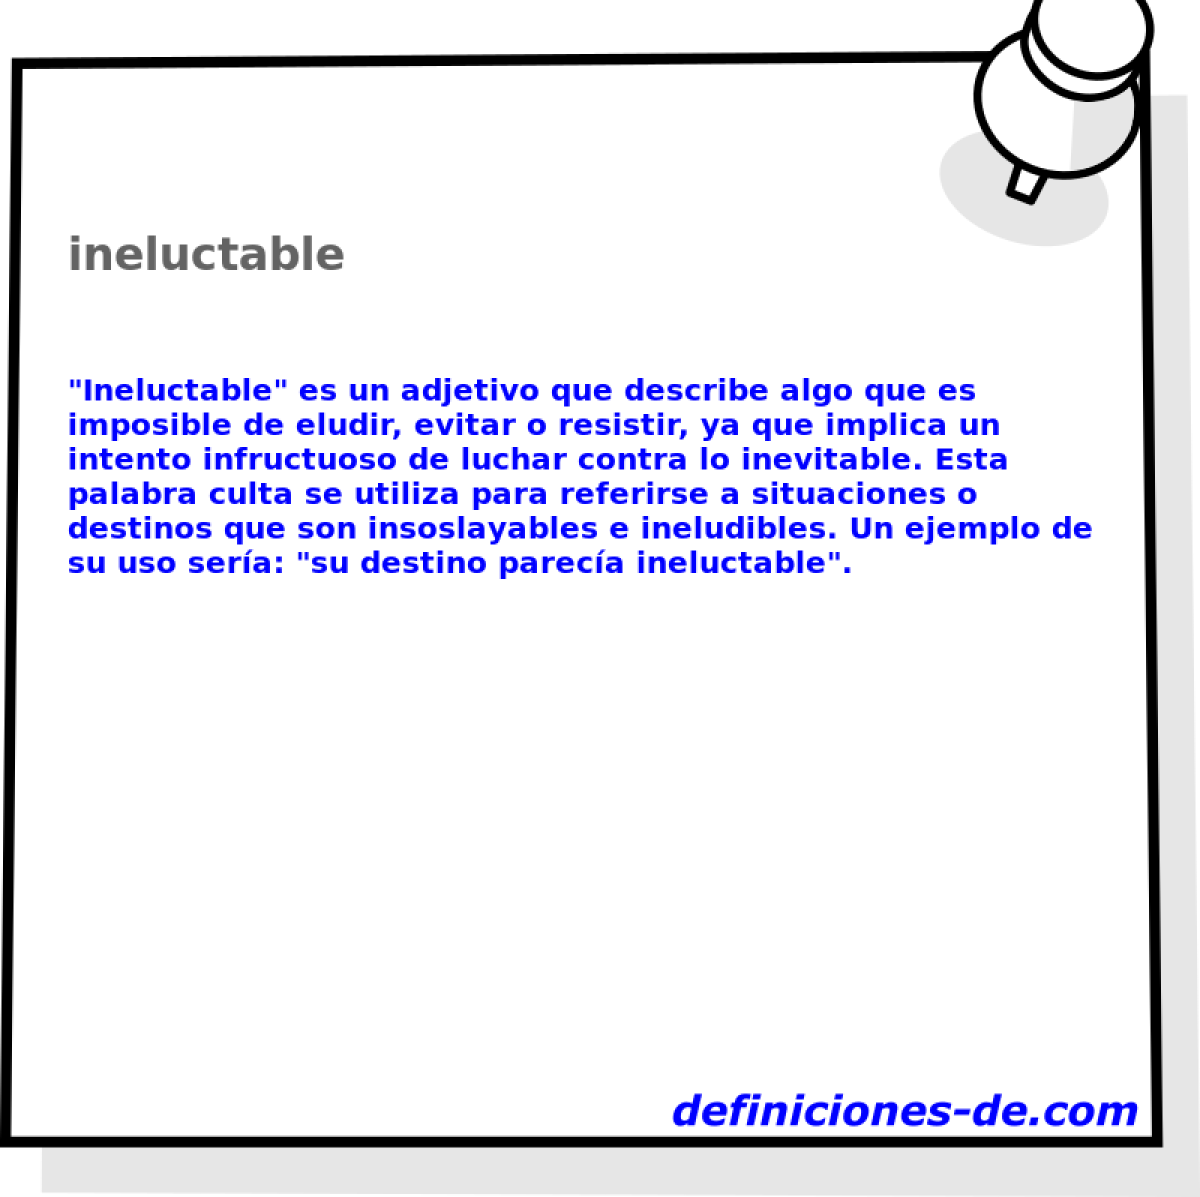 ineluctable 